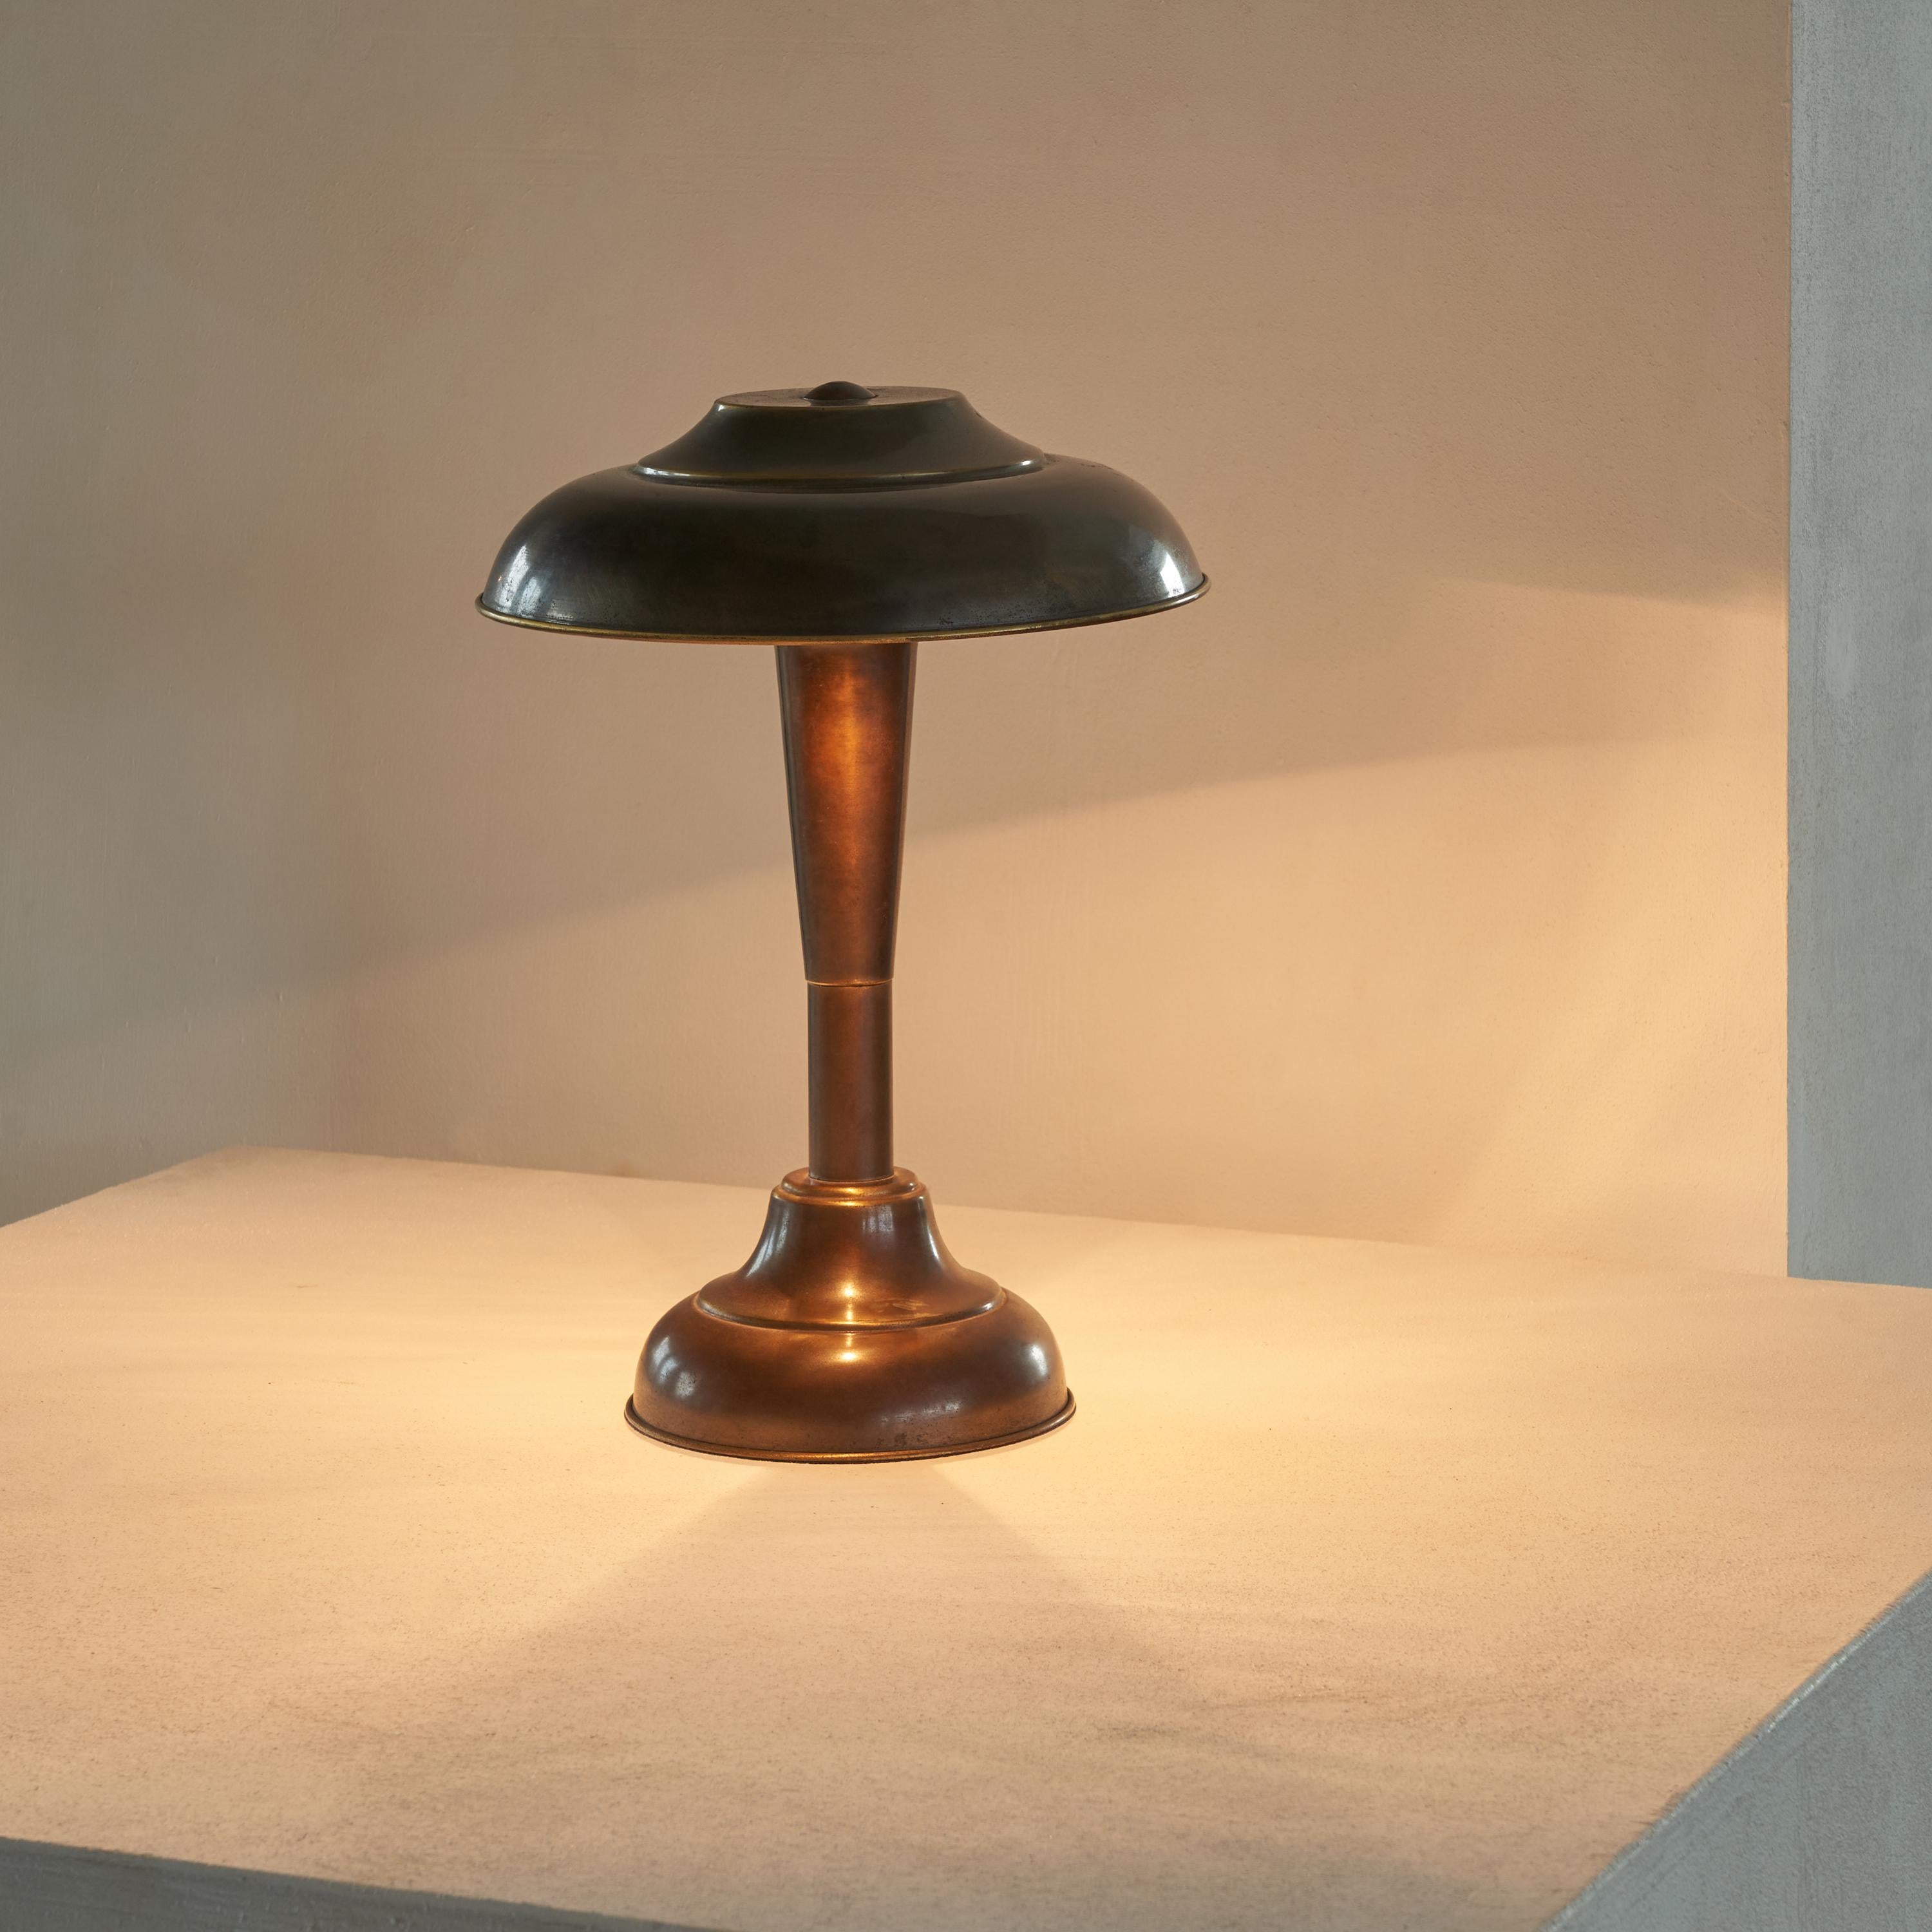 Art Deco table lamp in Patinated brass 1950s.

This is a wonderfully patinated table lamp in a distinct art deco style, probably made in the 1950s. A very rich and elegant design, with good proportions and details. 

The most beautiful feature